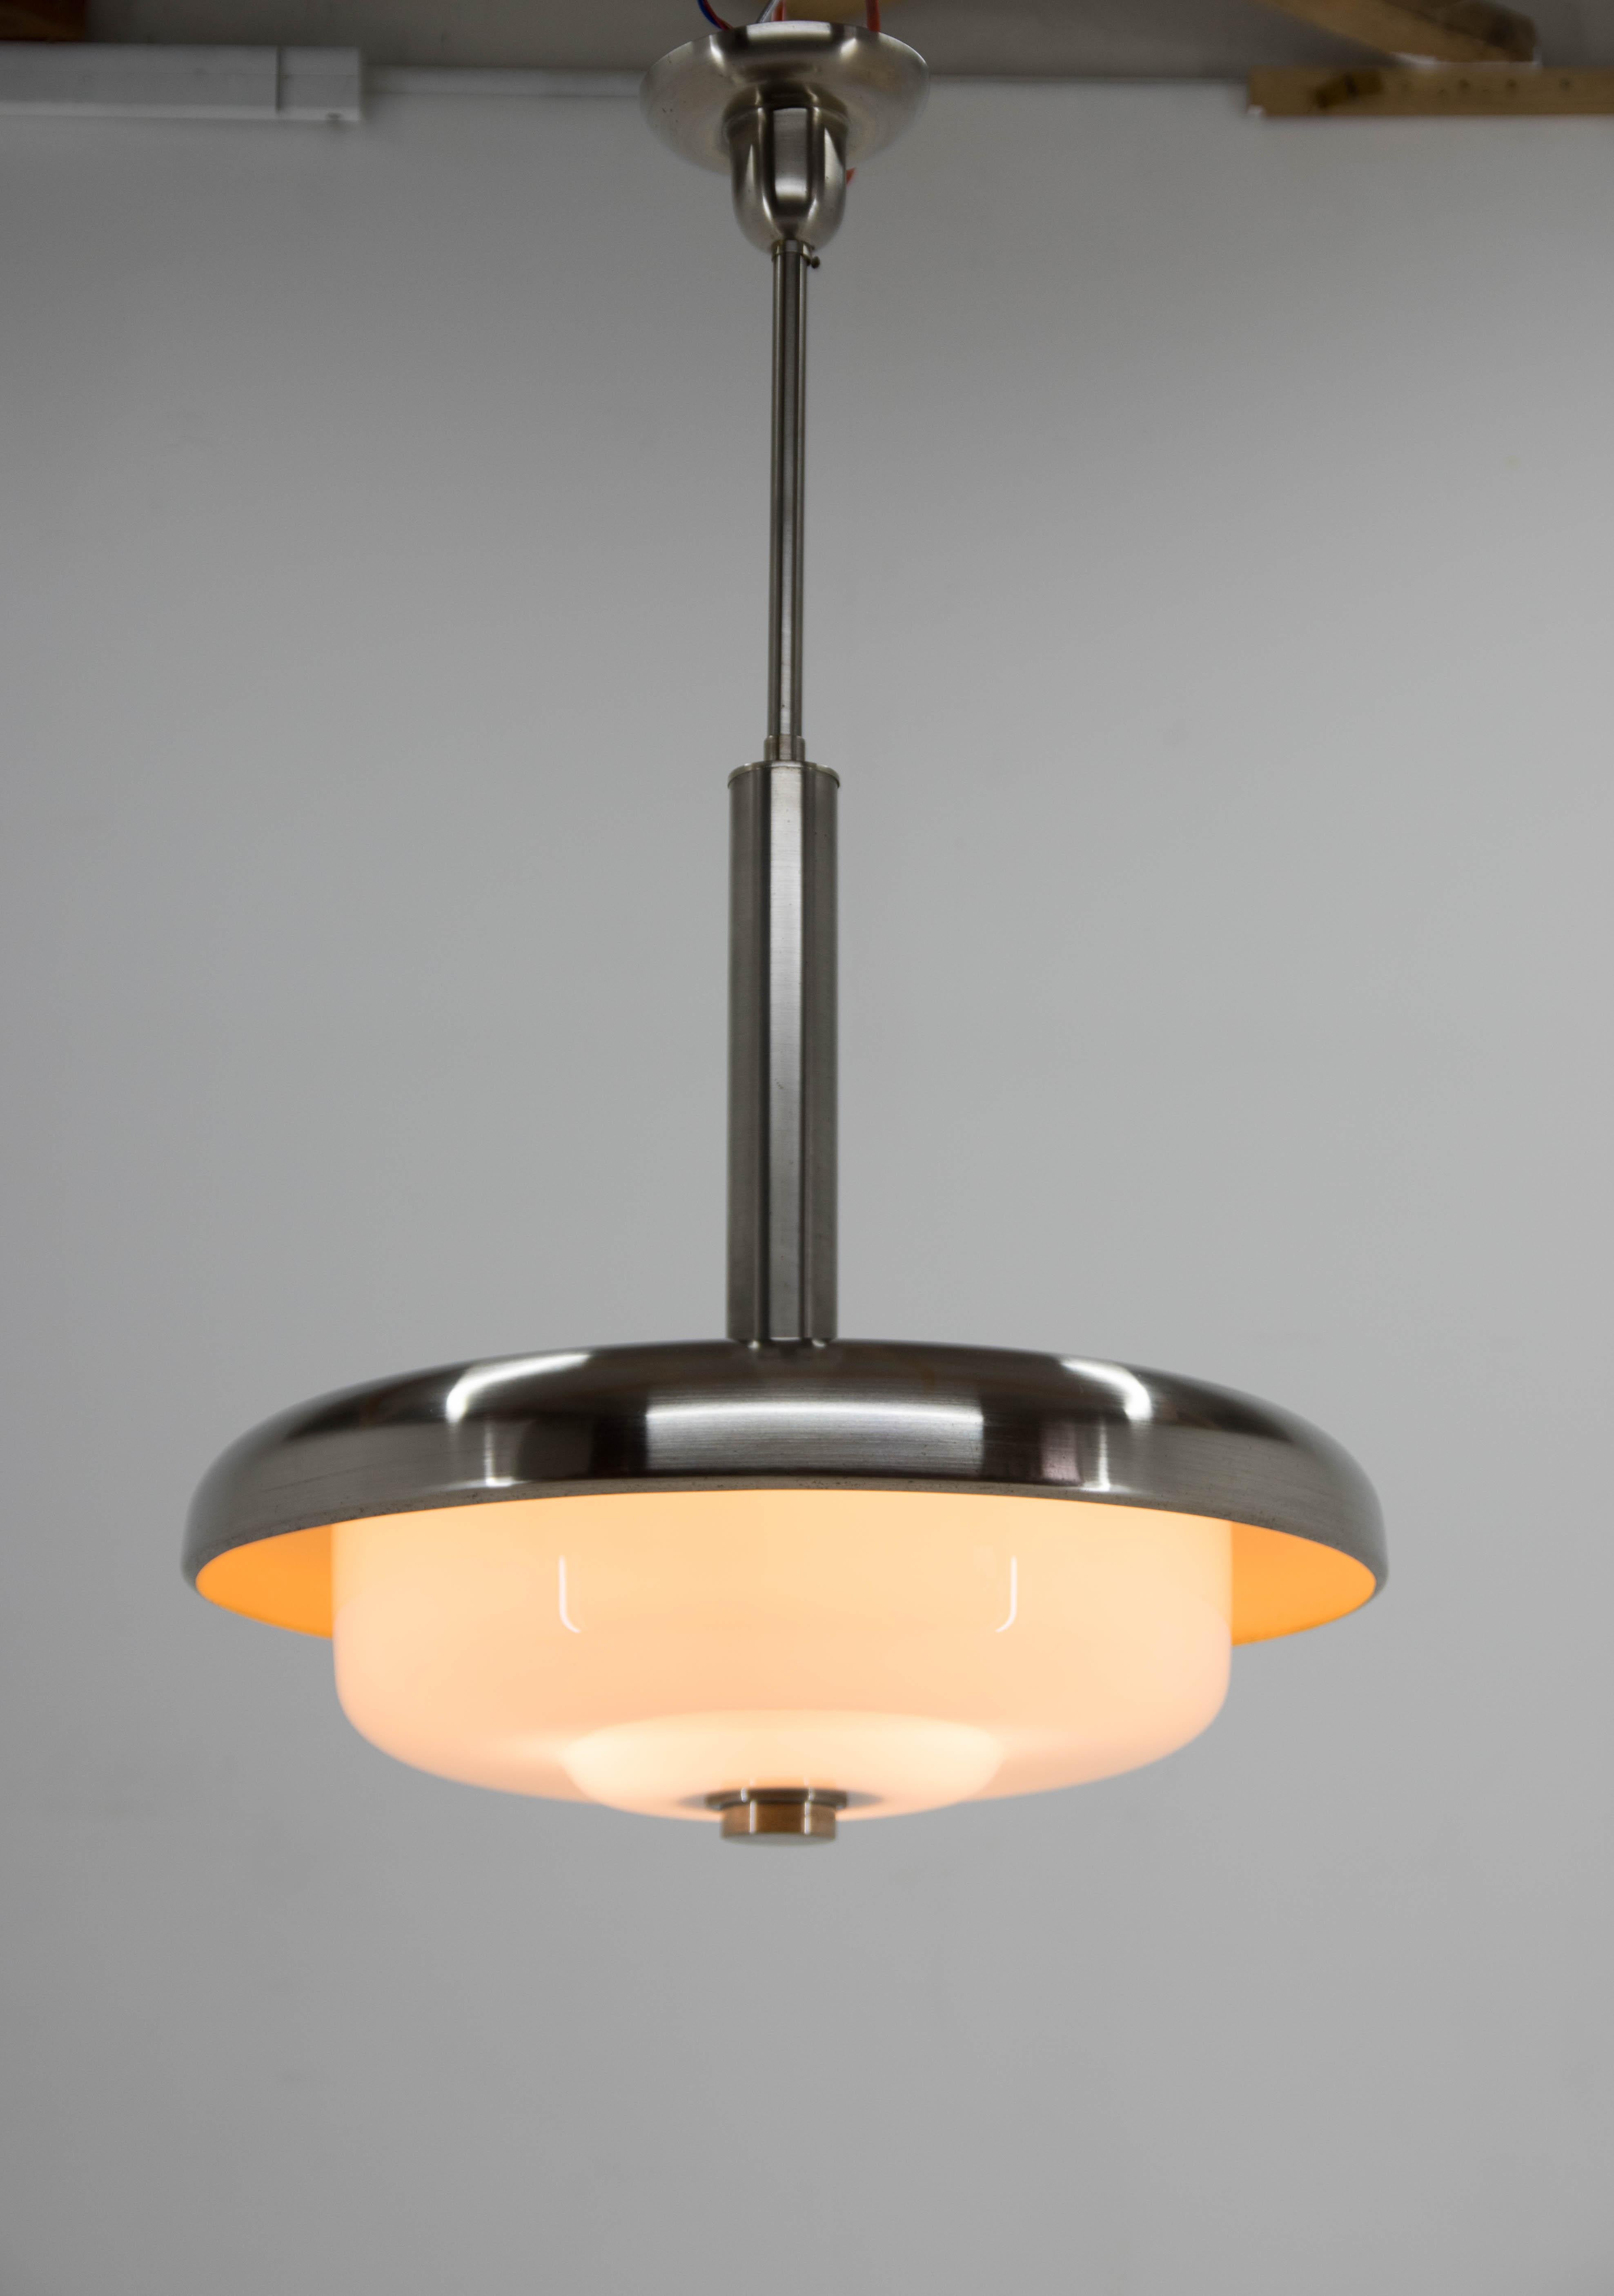 Stunning Bauhaus chandelier executed by IAS in 1930s.
Opaline glass shade marked by Pyroplex.
Very good original condition.
Nickel polished, rewired:
3x60W, E25-E27 bulbs
US wiring compatible
Shipping quote to US on request.